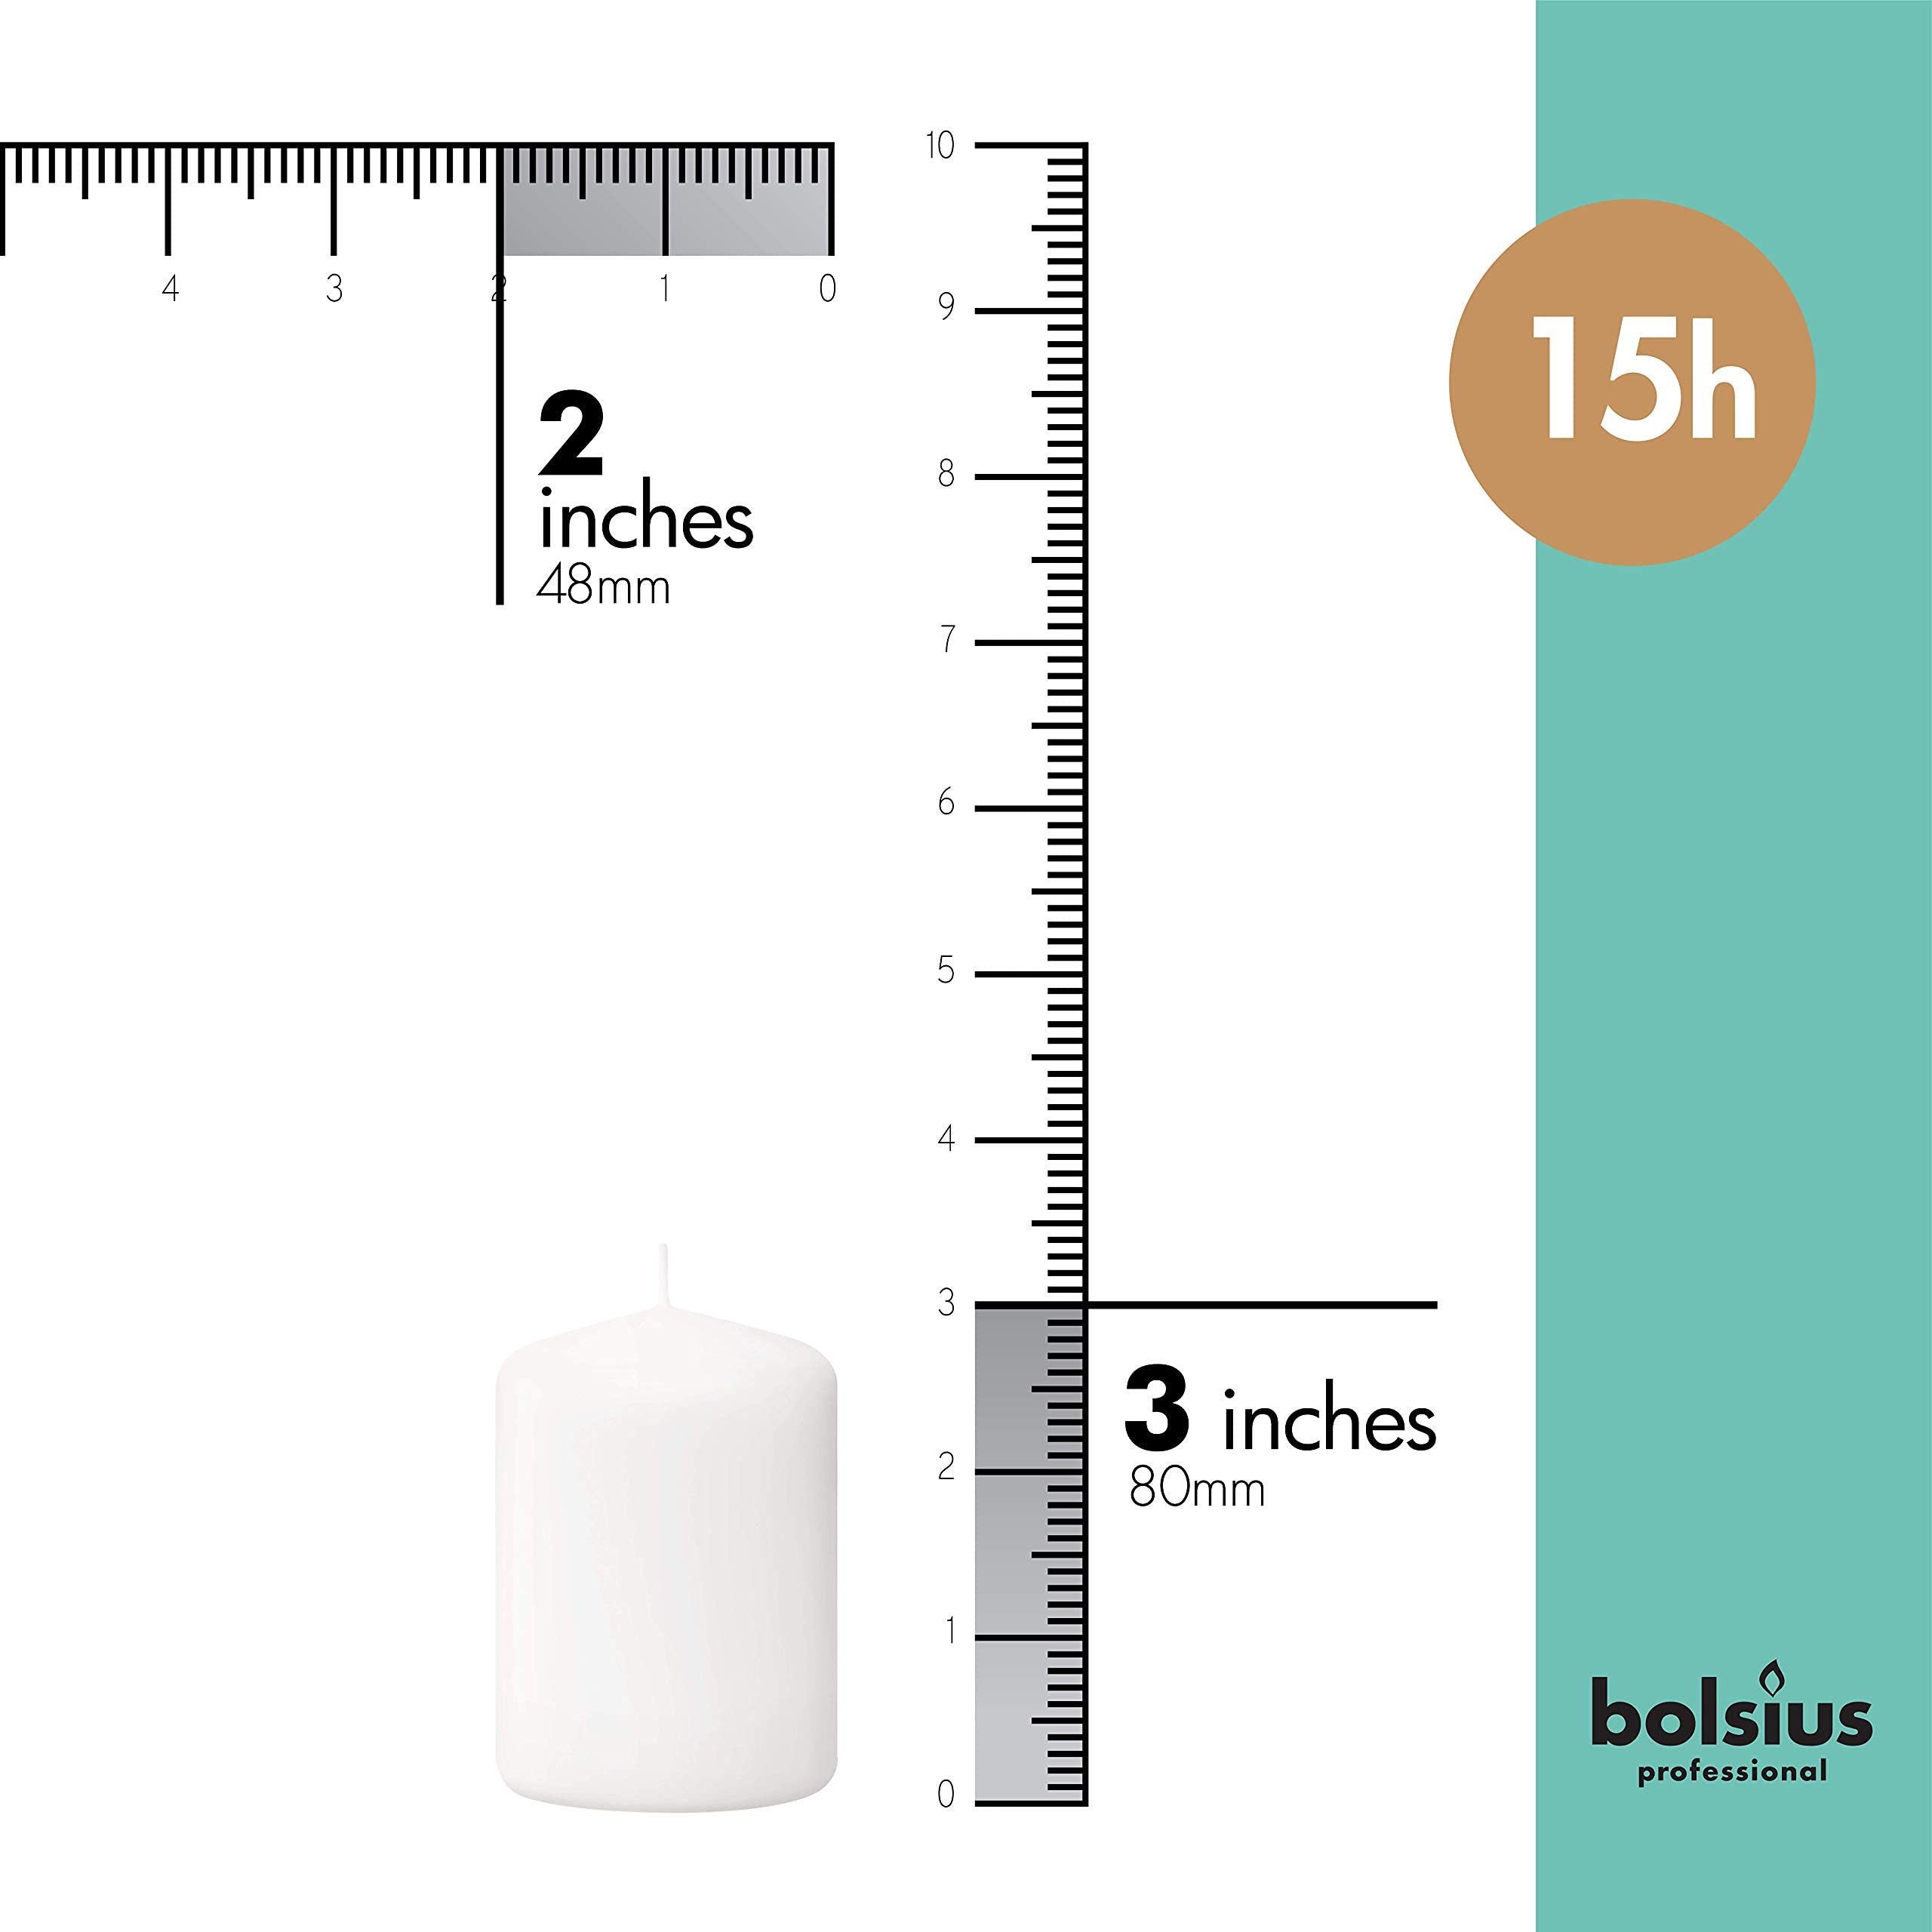 Bolsius White Pillar Candles � 2x3 Inches � 20 Pack Unscented � Premium European Quality � Dripless, Smokeless, and Clean Burning Household Candles � Perfect for Wedding, Party, Dinner, And Home D�cor  - Acceptable